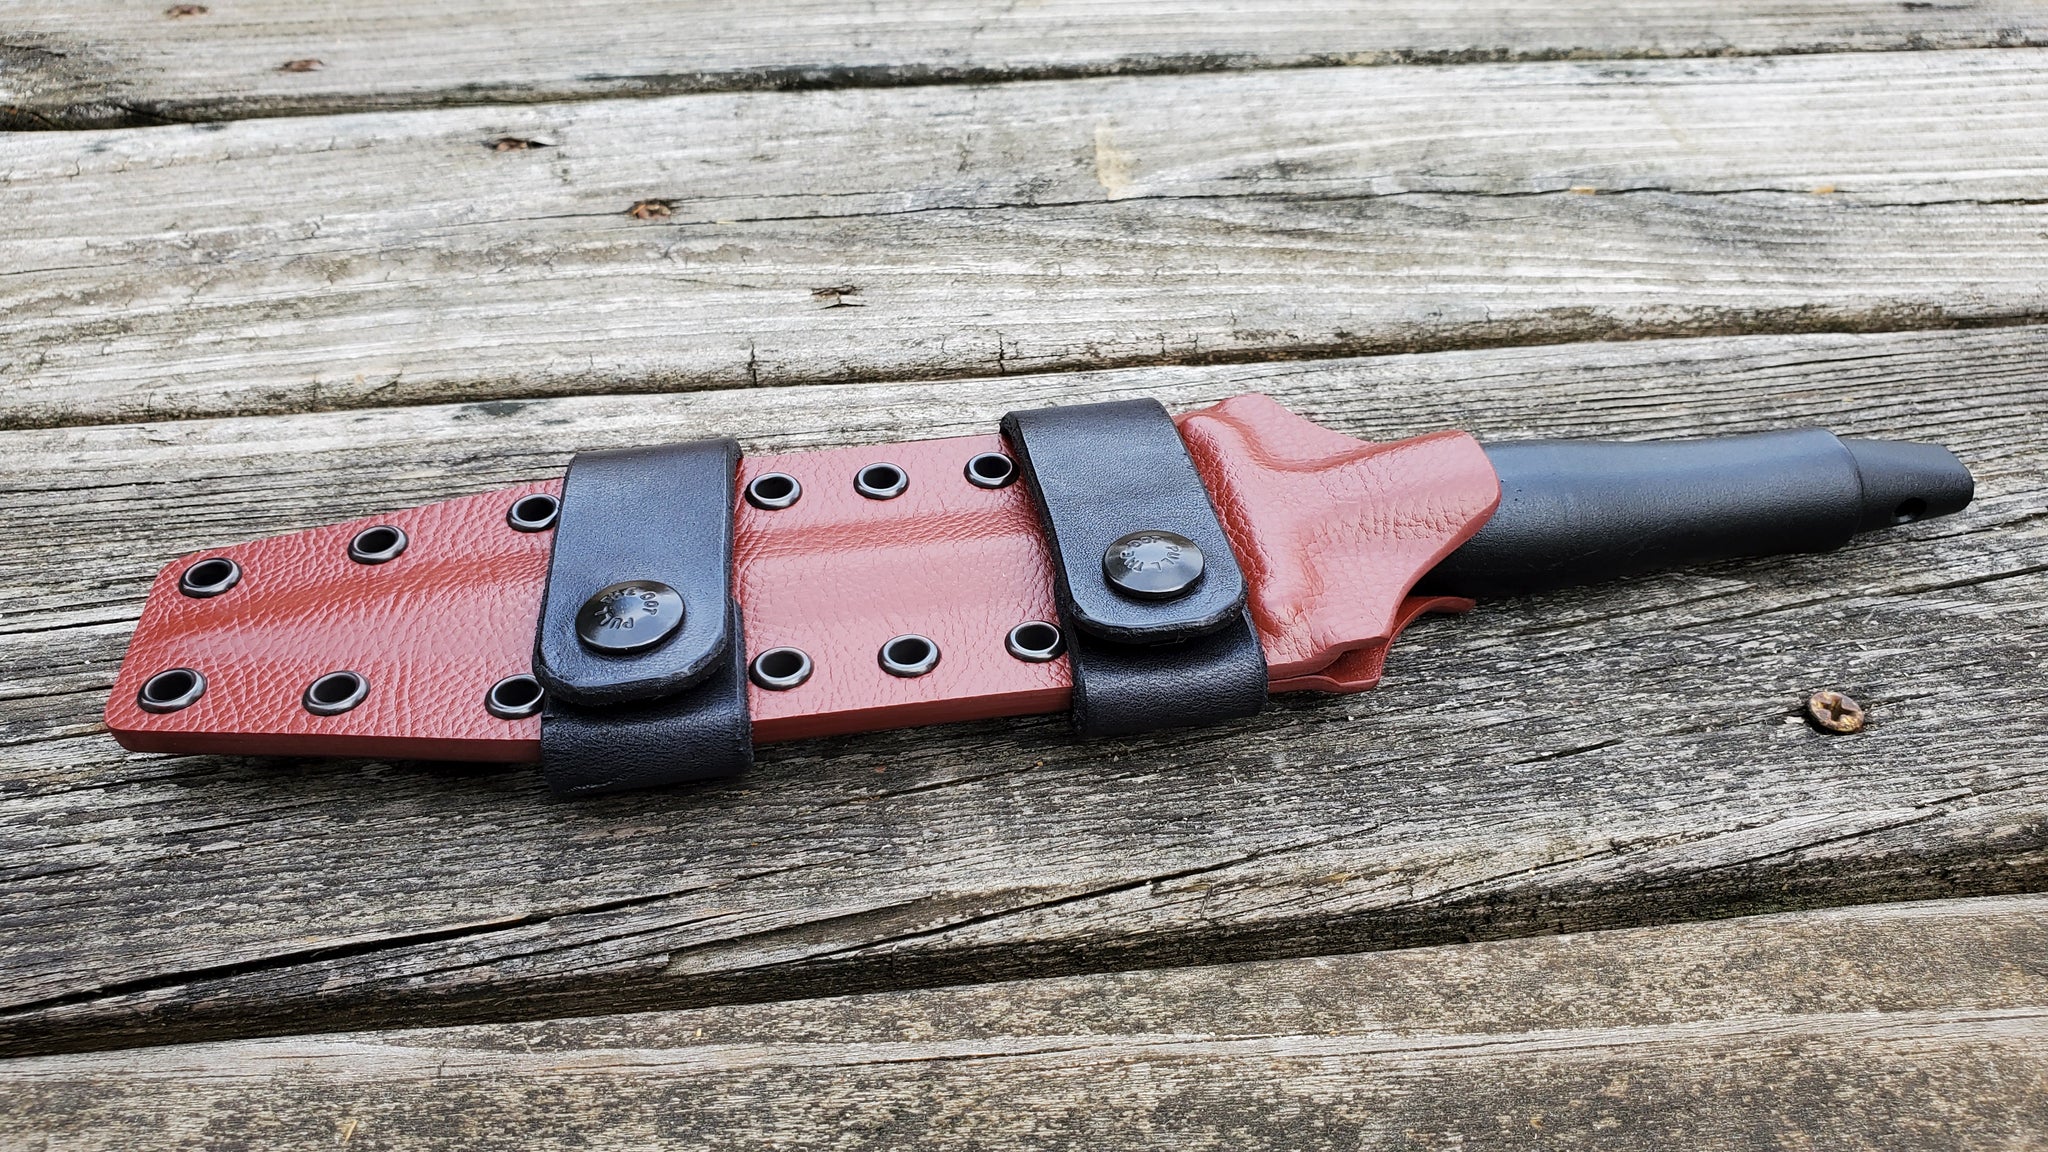 Gerber " MARK II " Kydex sheath, Scout Carry Leather Straps